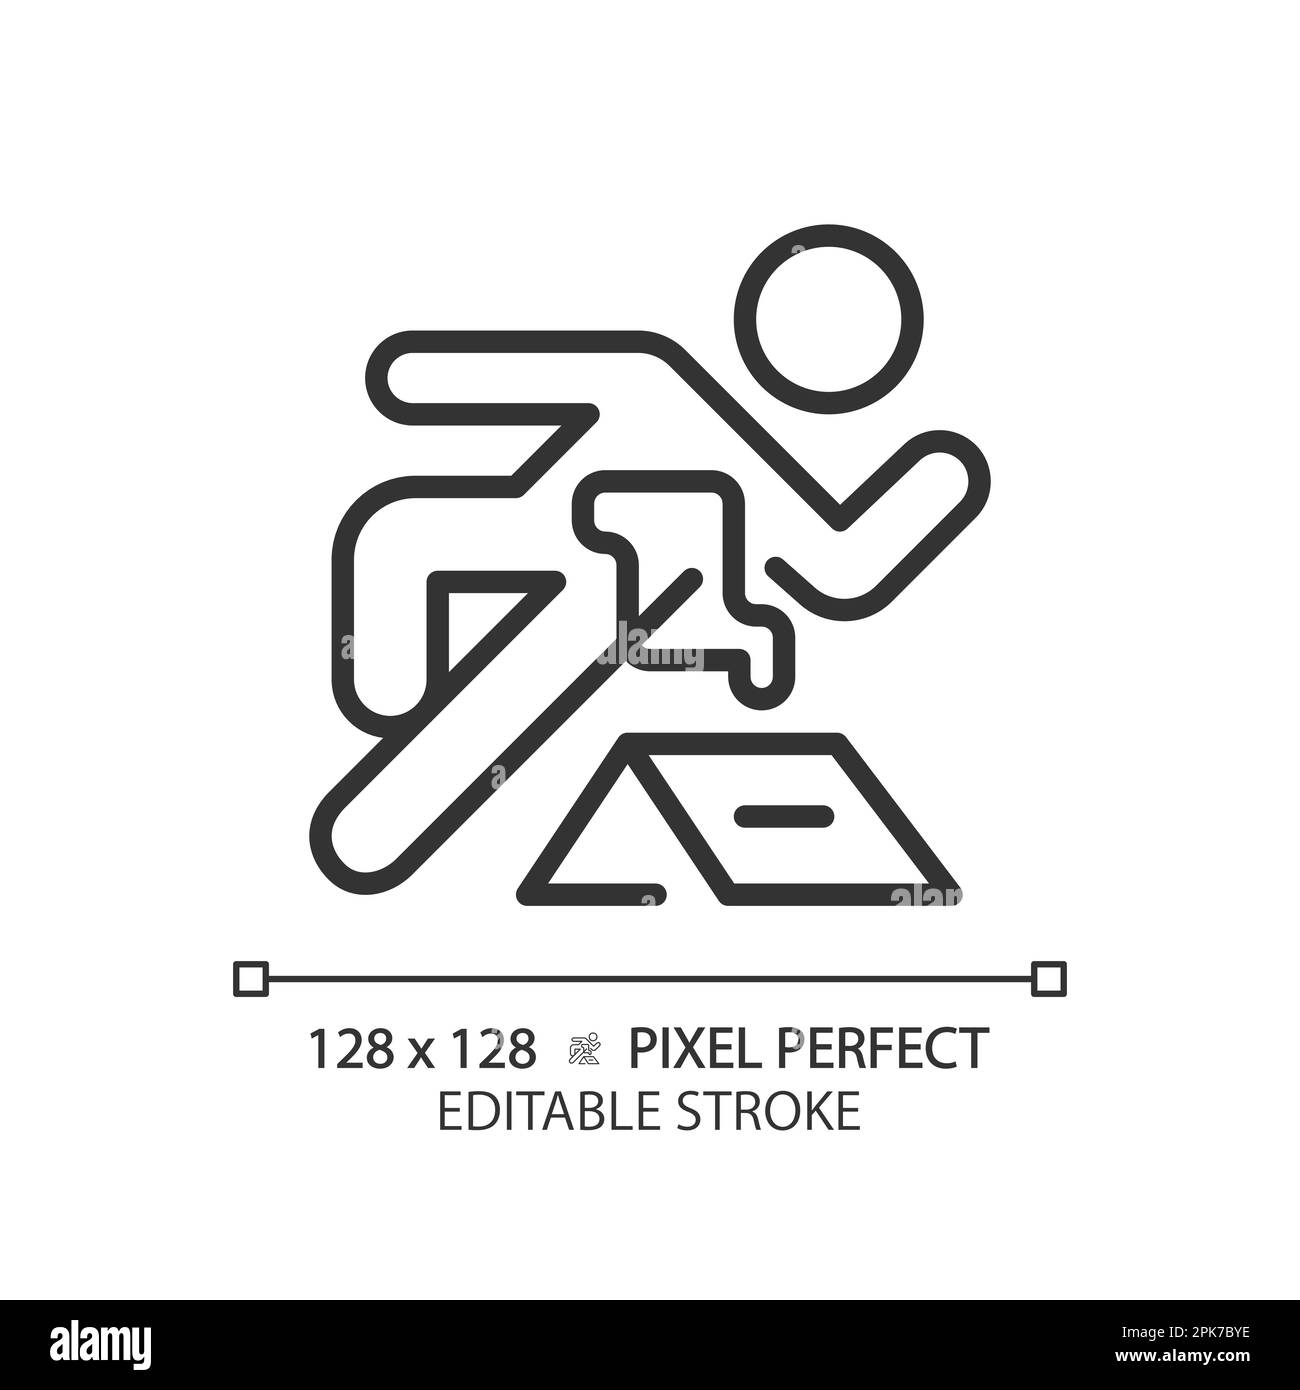 Crime pixel perfect linear icon Stock Vector